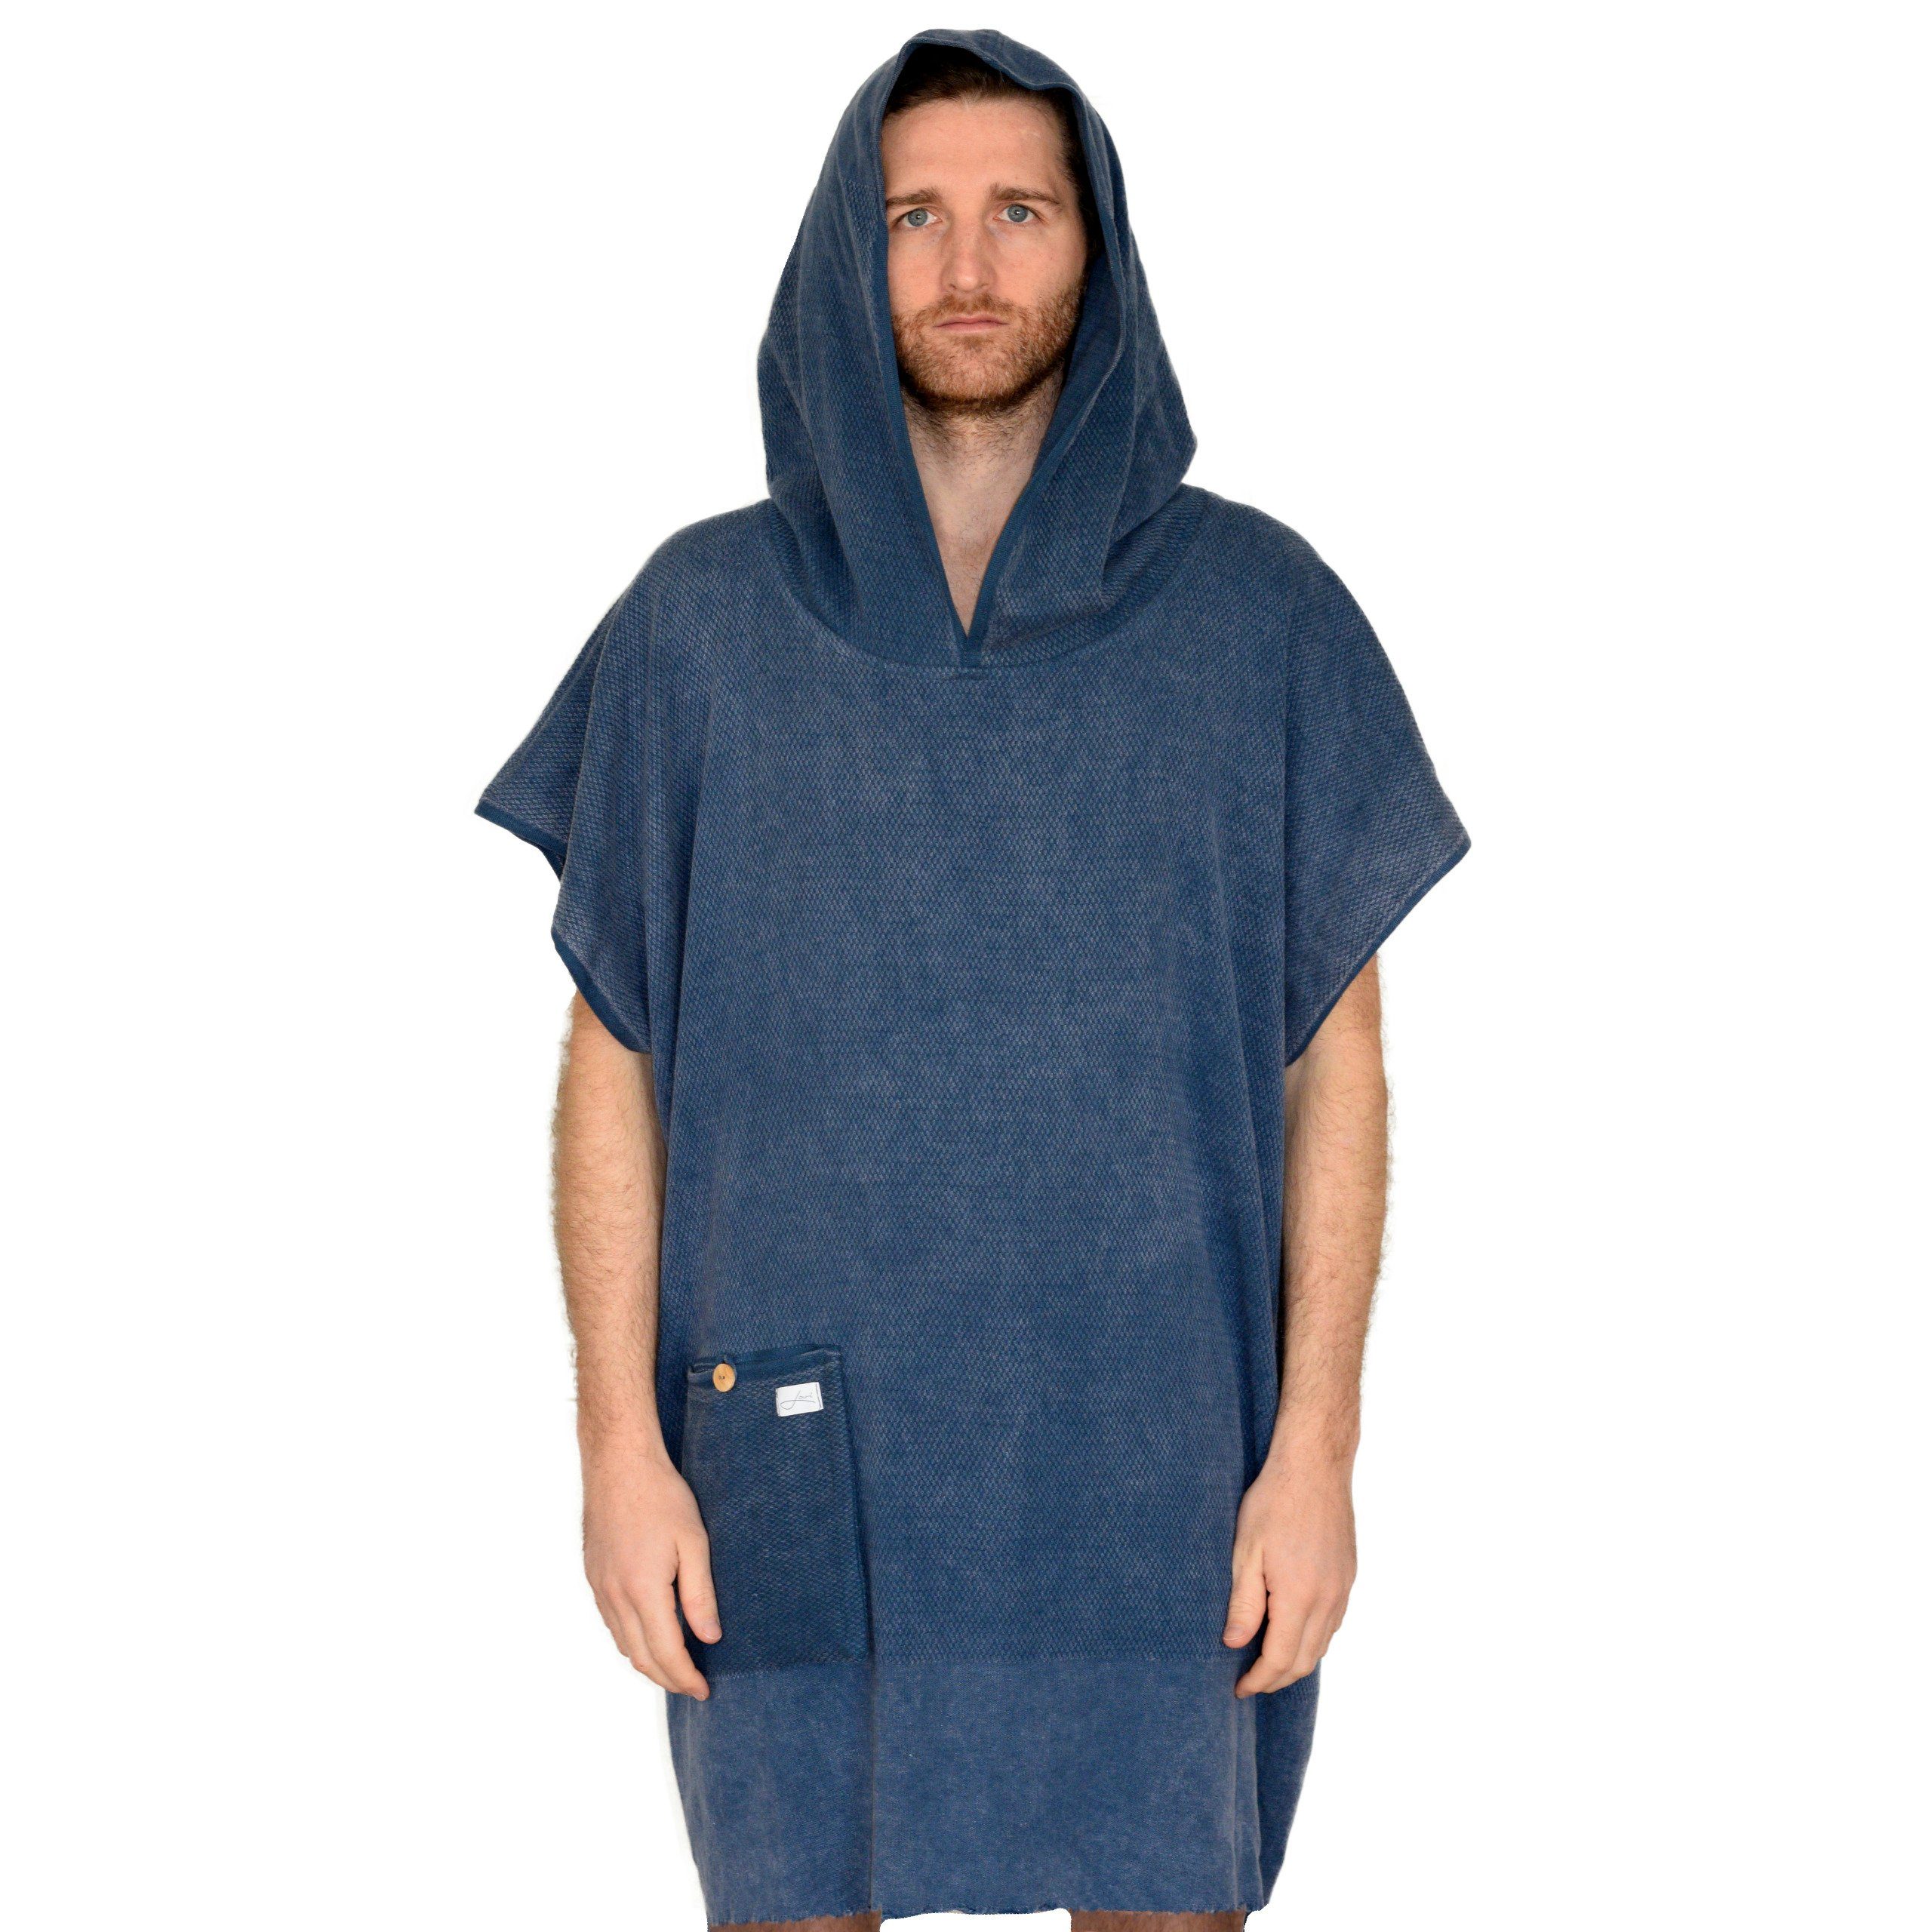 Lou-i Kapuze & Germany Badeponcho blau (leicht schnell trocken), in Badeponcho Surfponcho Made